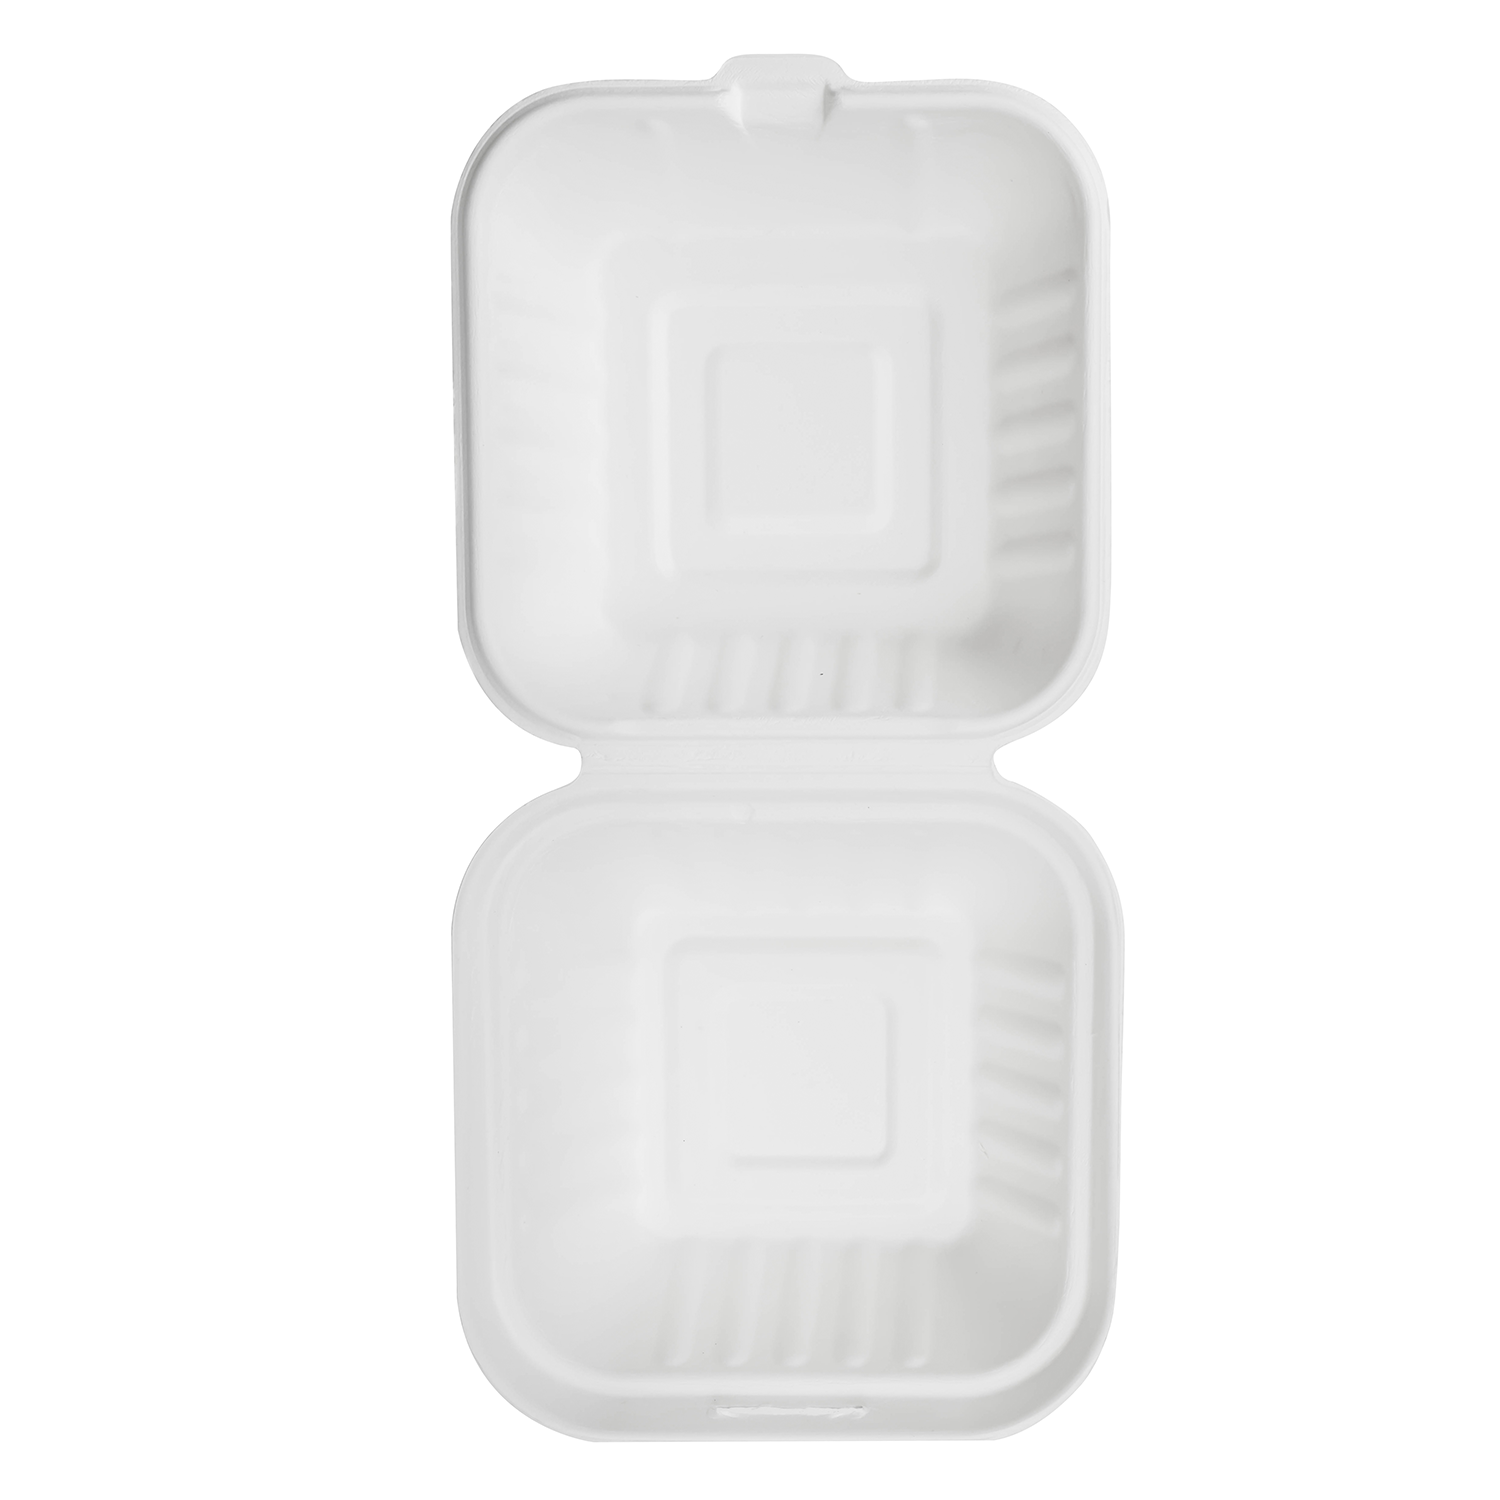 Small Compostable Food Containers - Karat Earth 6''x6'' Compostable Ba